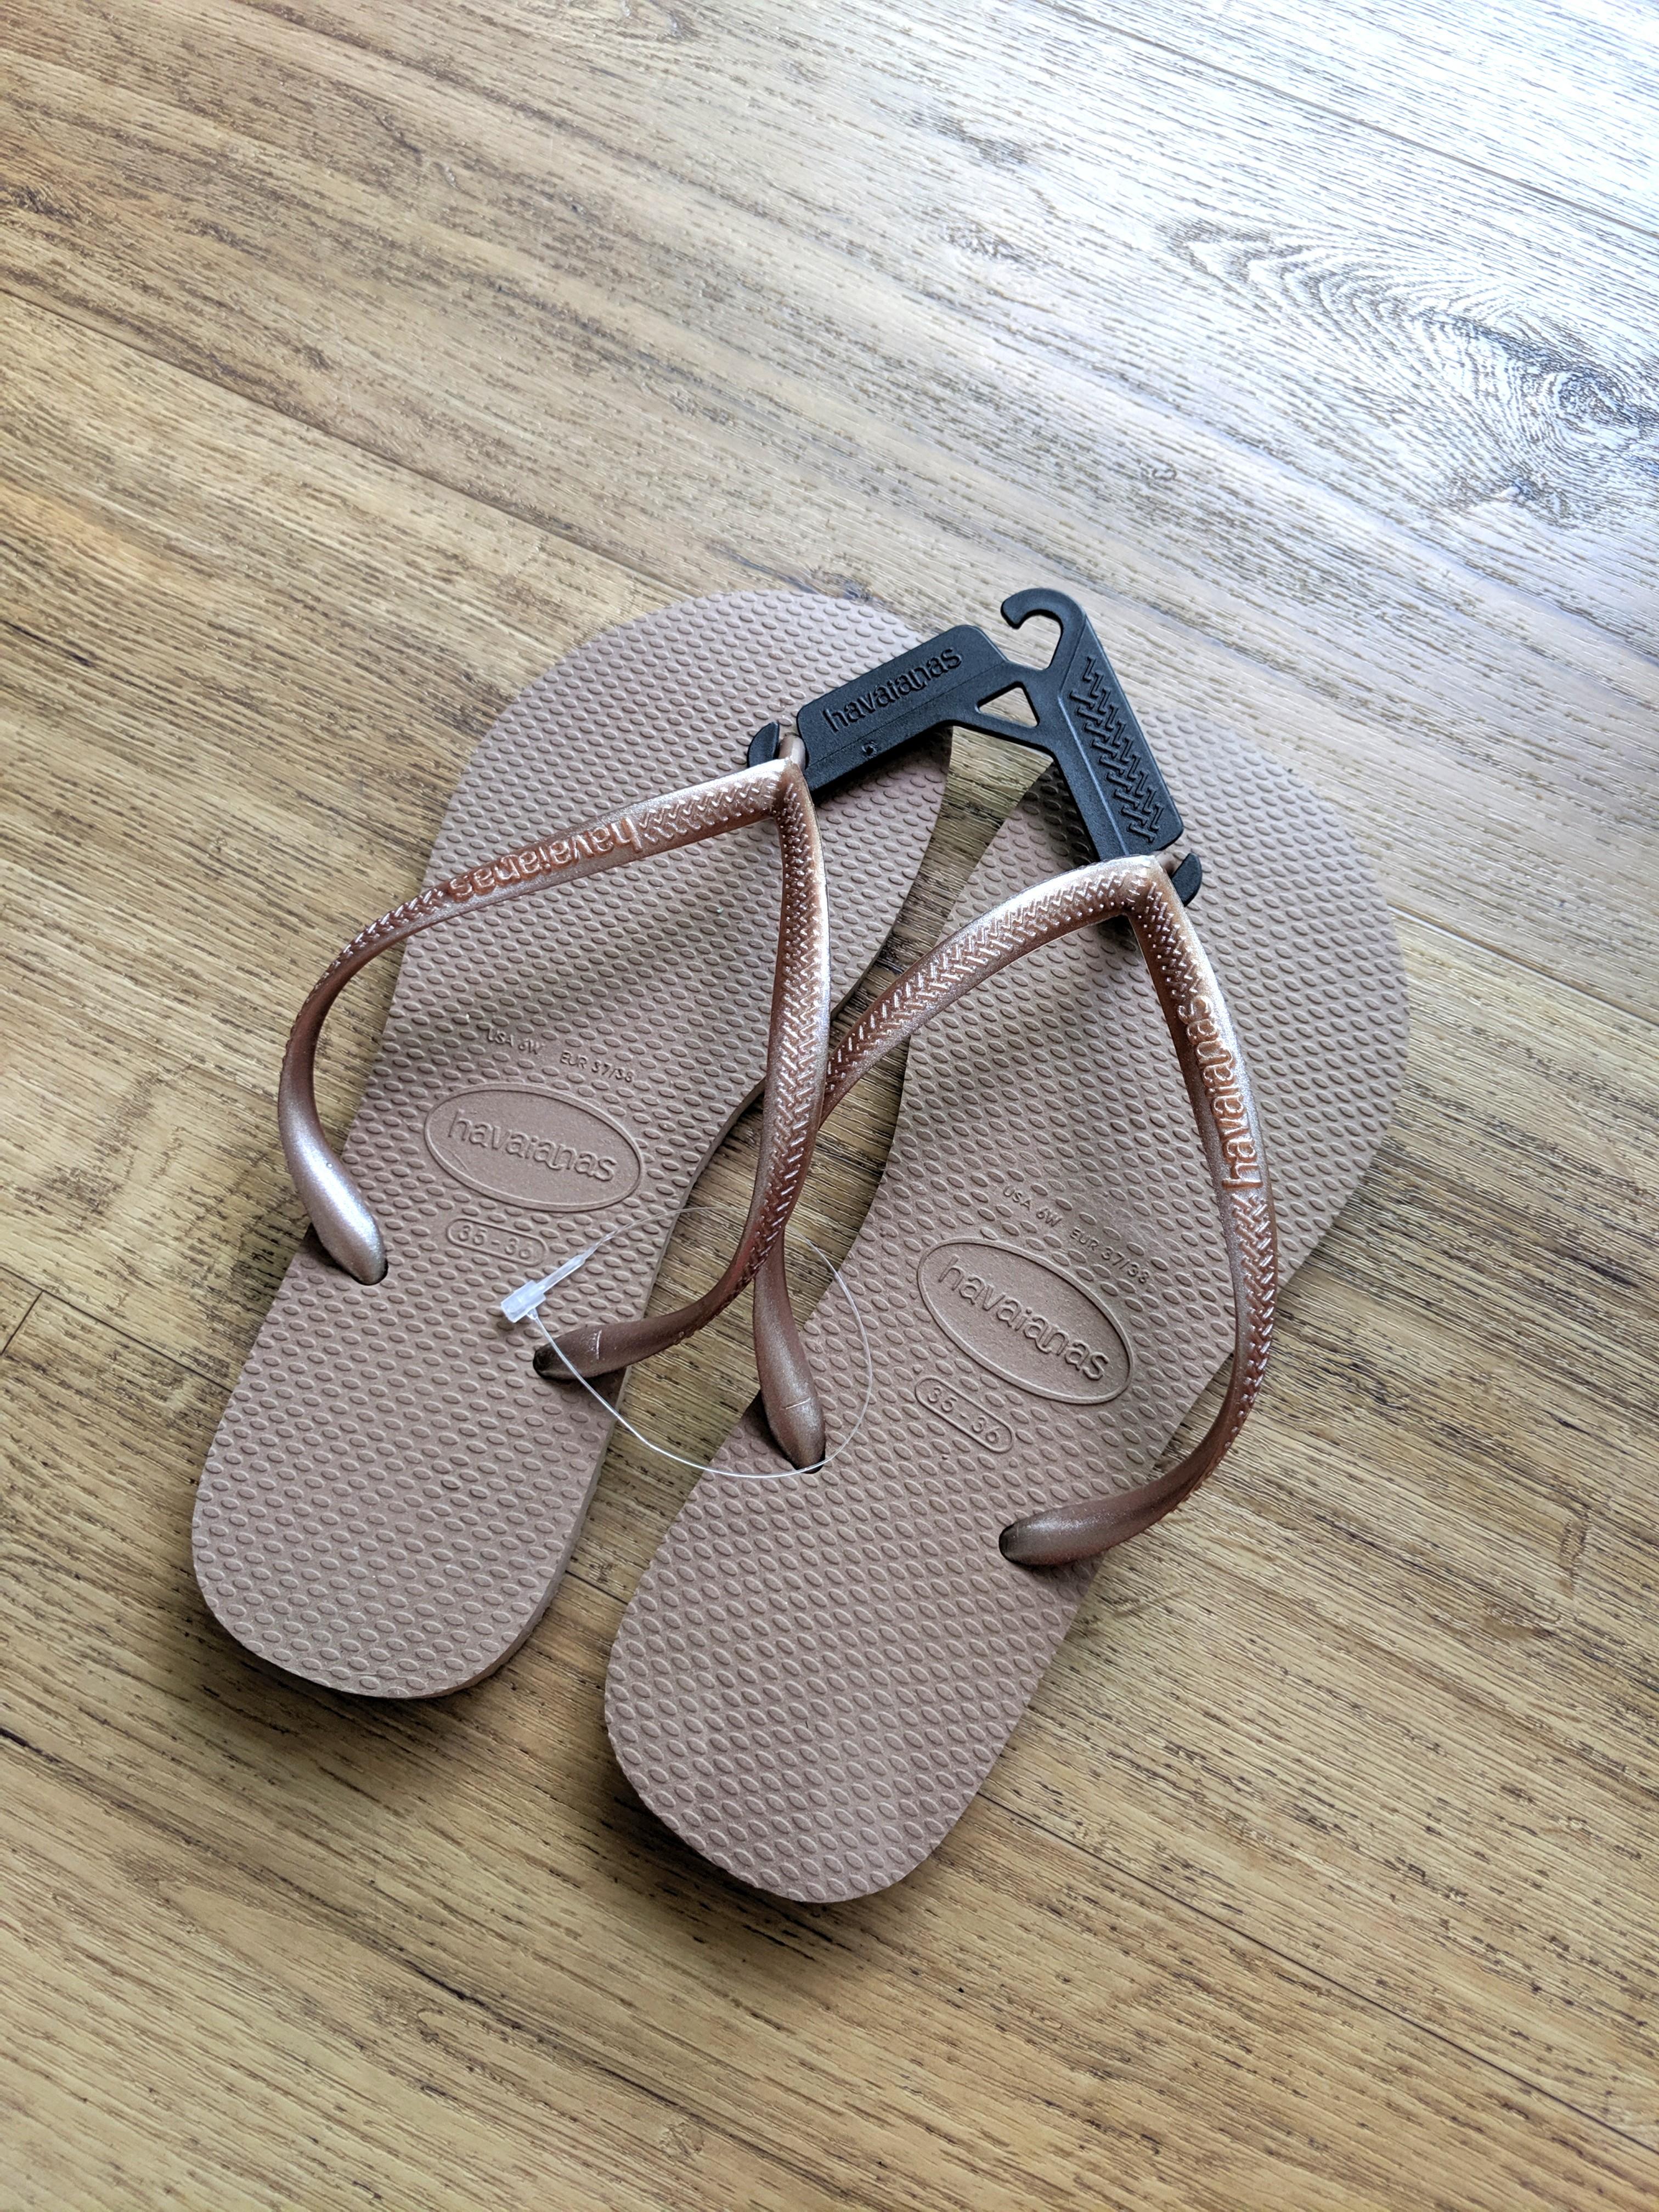 havaianas slippers rose gold